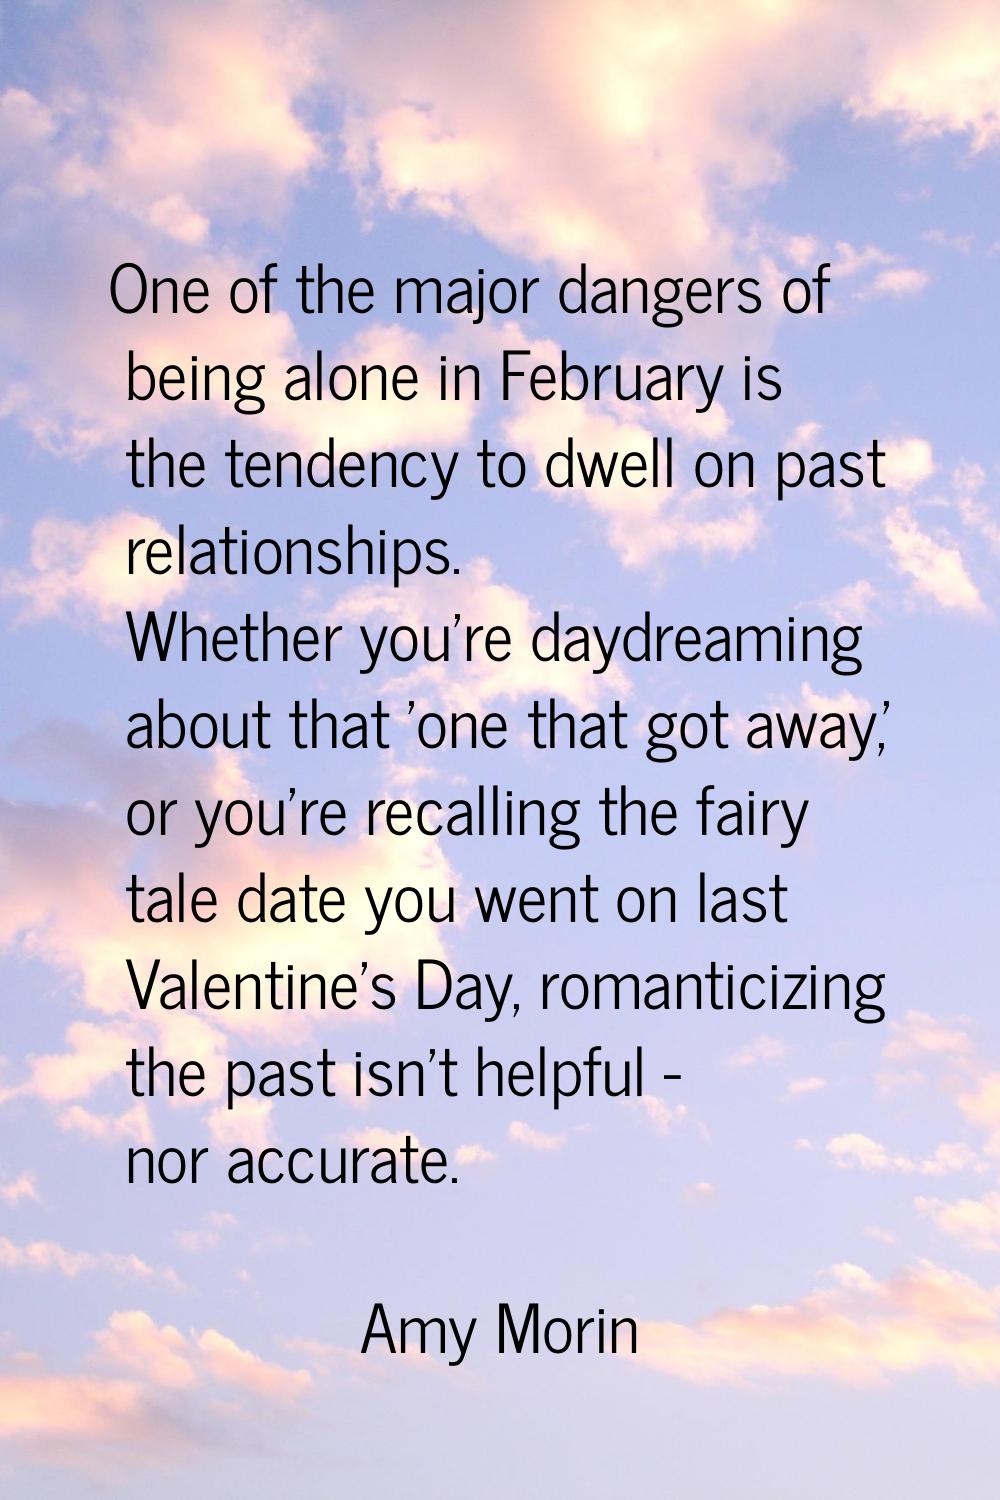 One of the major dangers of being alone in February is the tendency to dwell on past relationships.